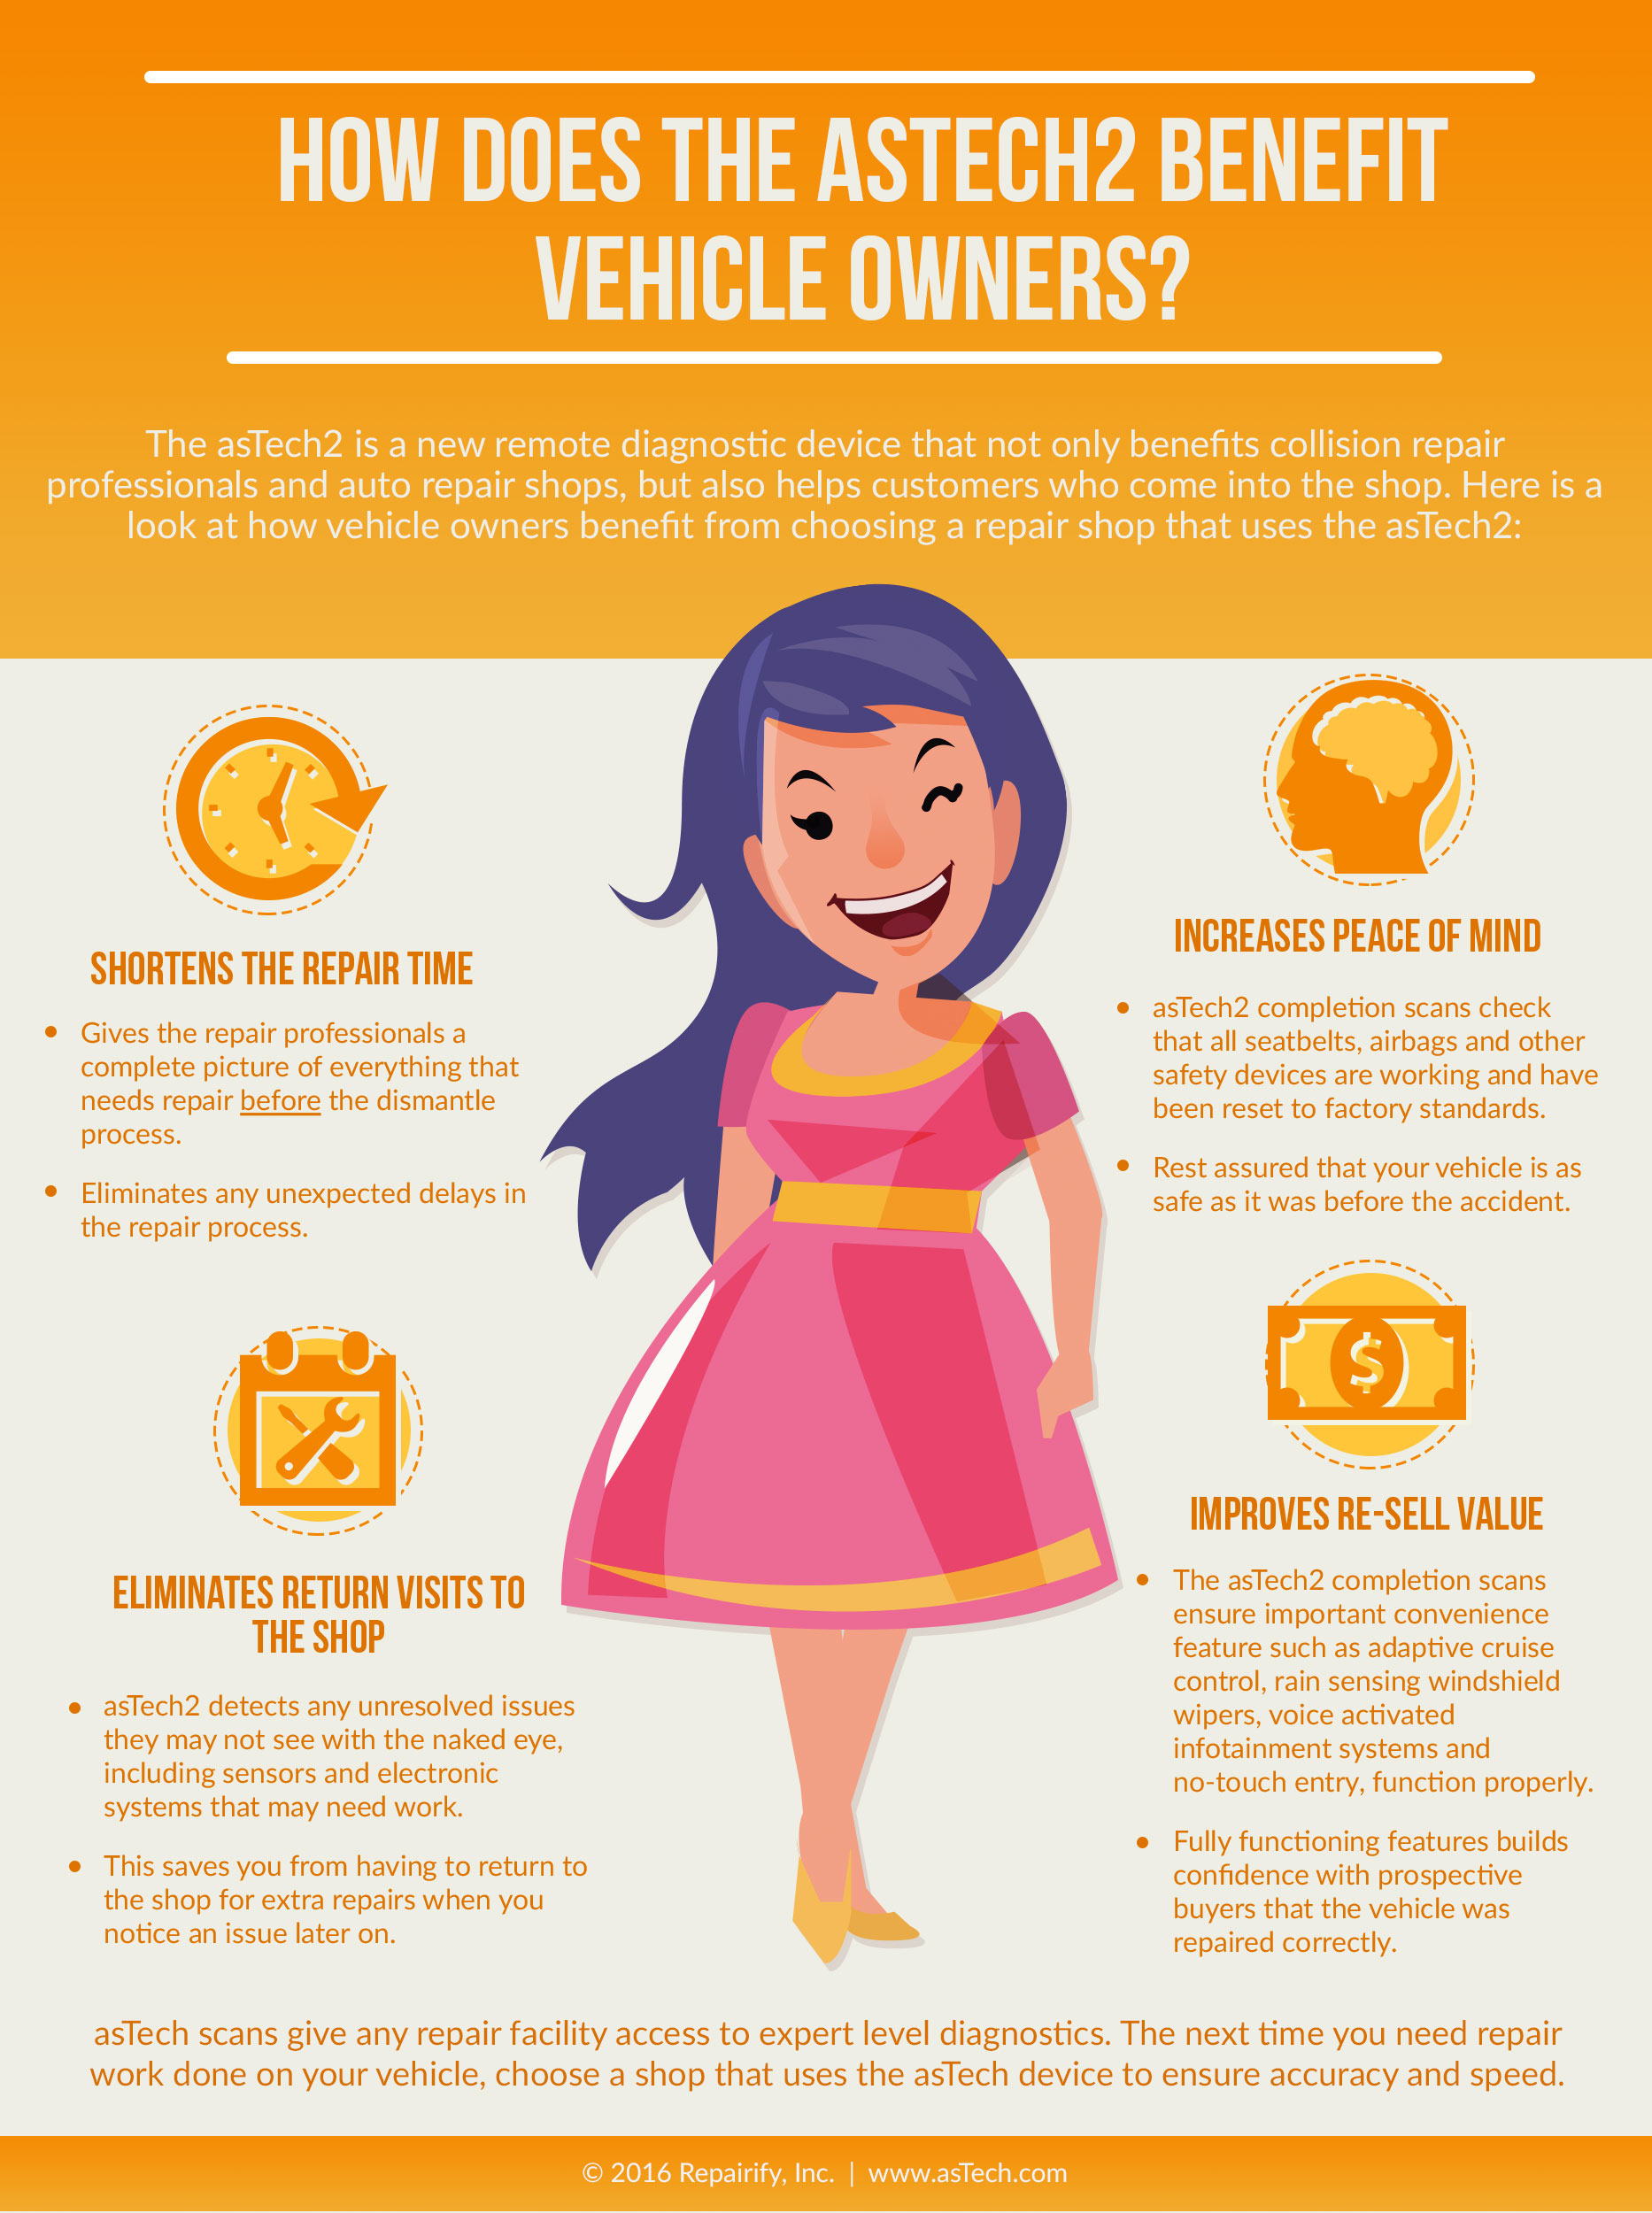 How Does the asTech2 Benefit Vehicle Owners?